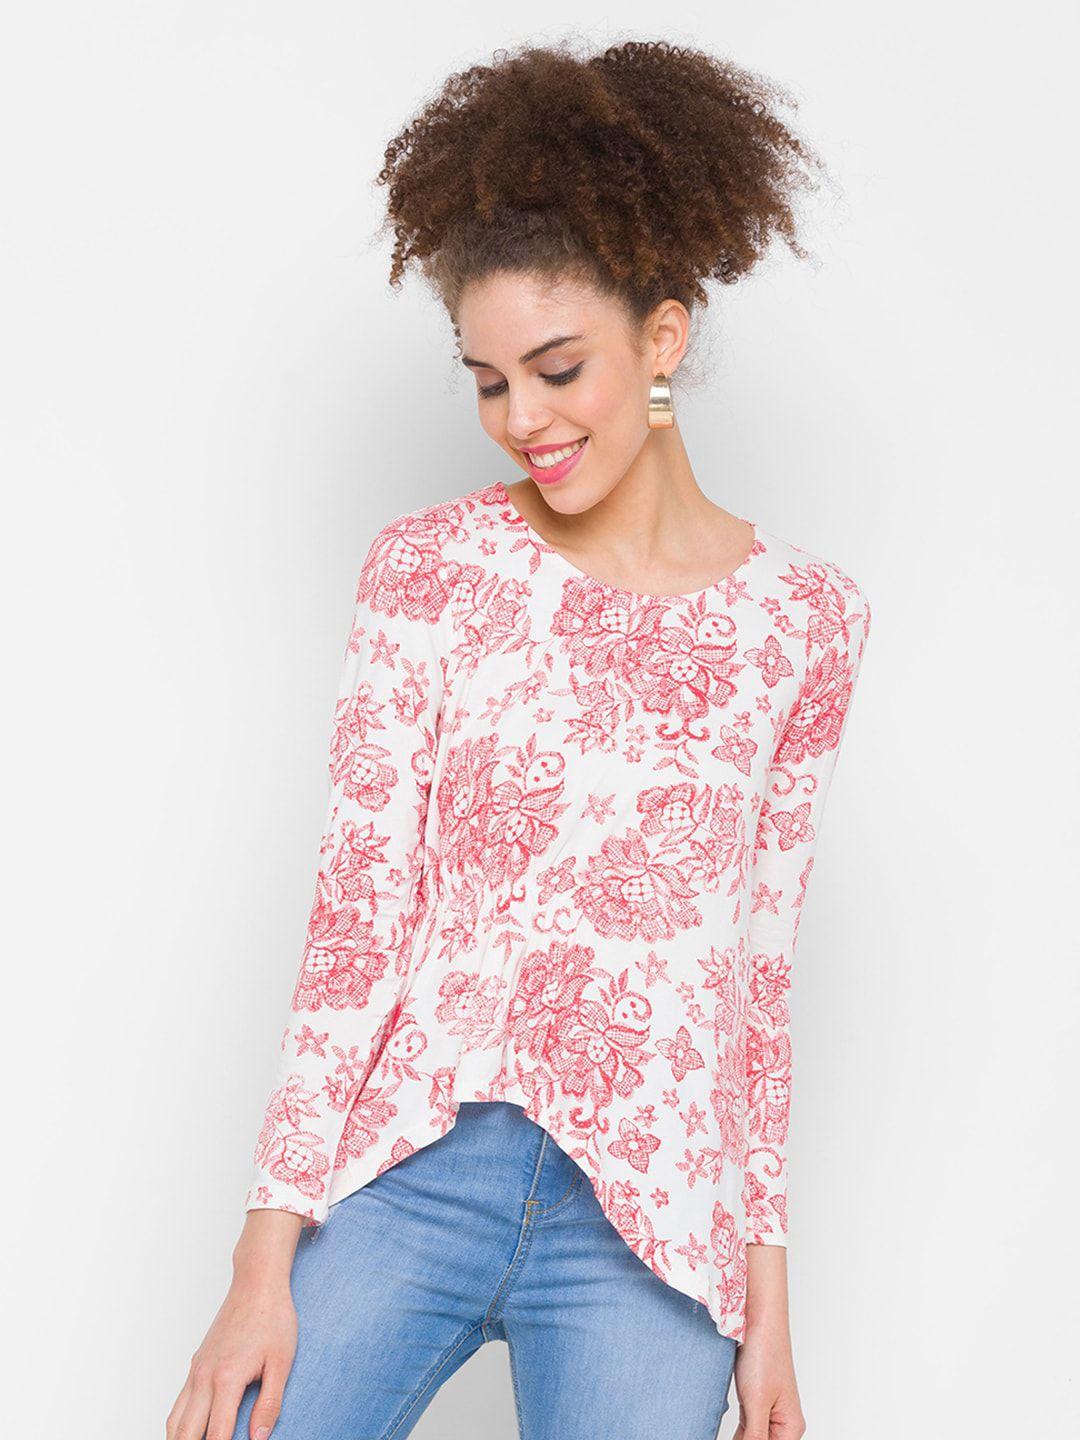 globus white & red floral print high-low top